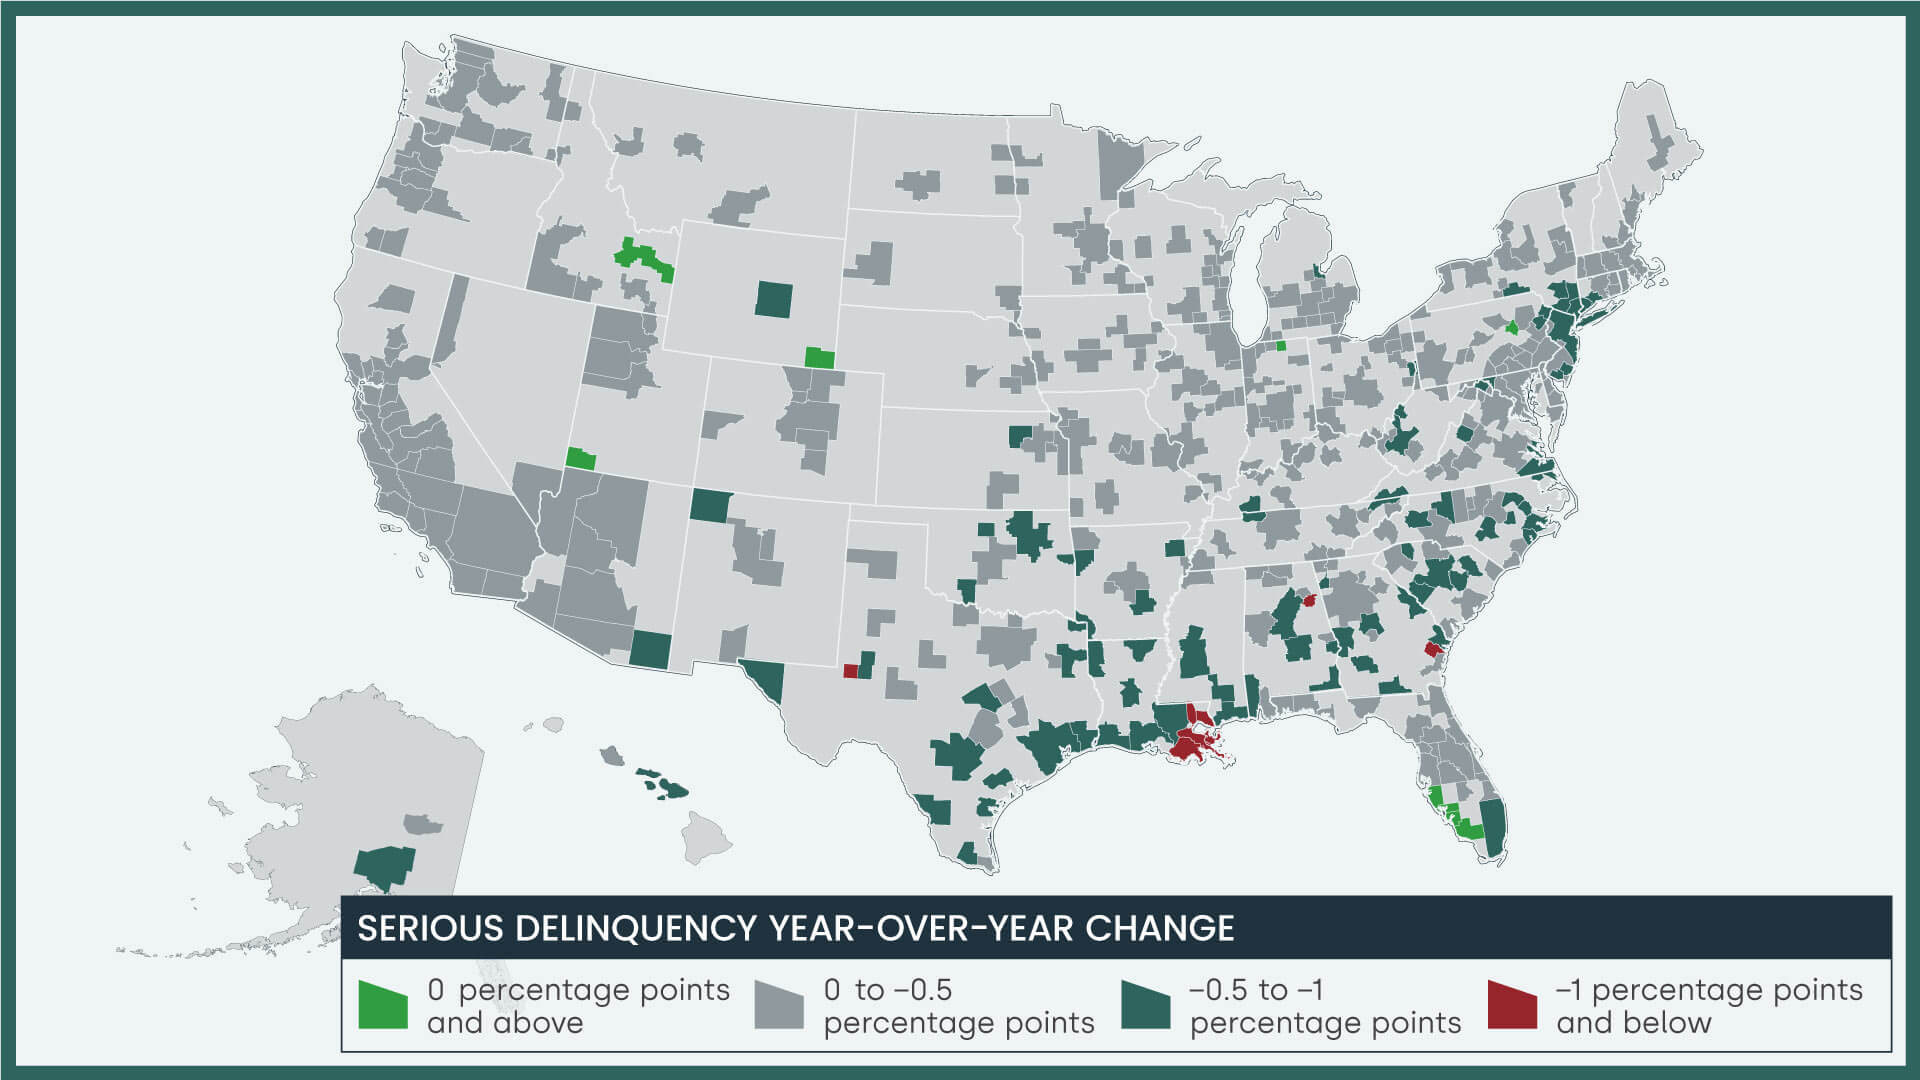 Mortgage delinquency changes by U.S. metro area